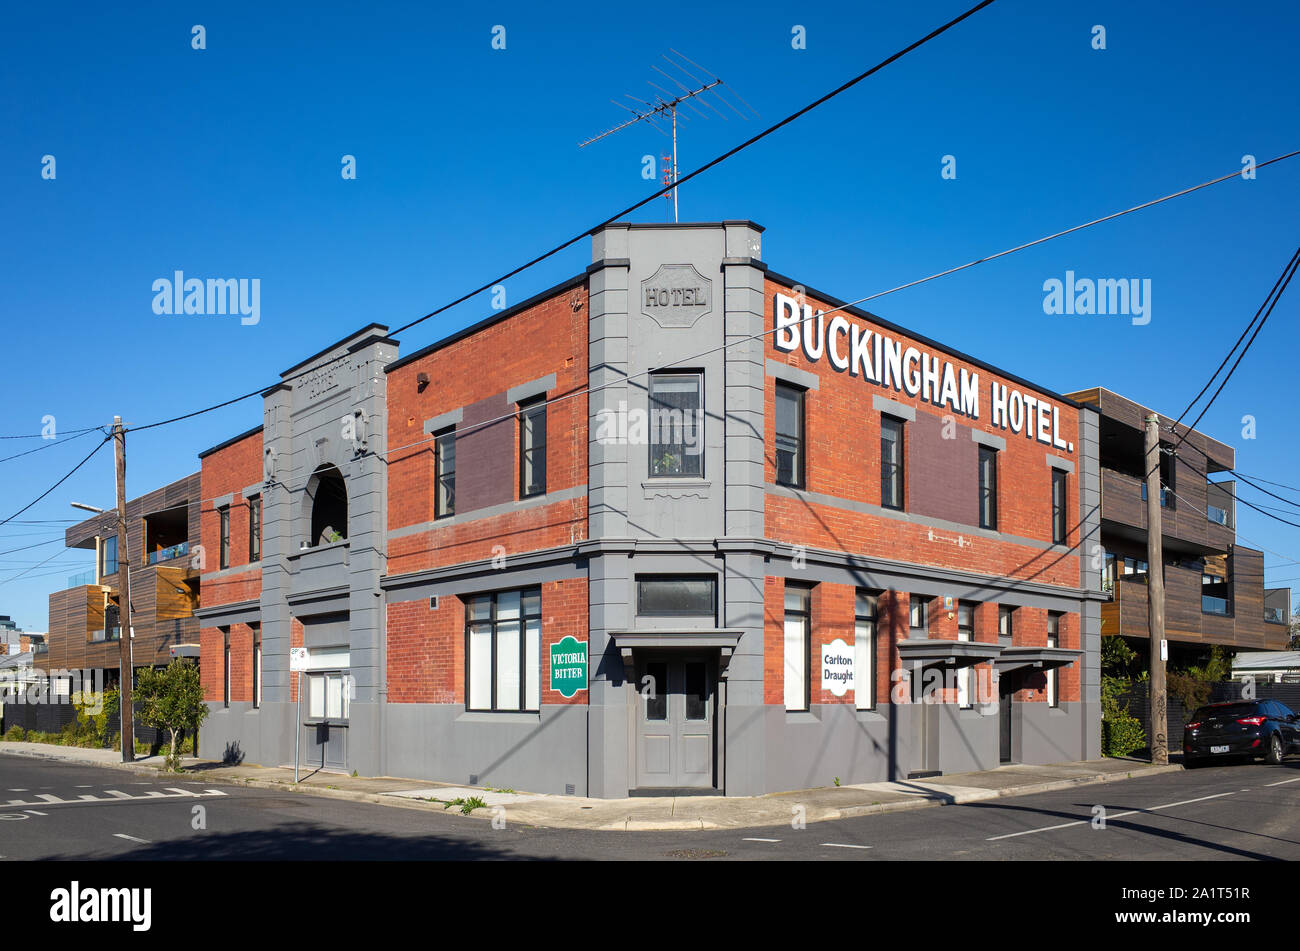 The building of The Buckingham Hotel, it was one of the oldest pubs in Footscray. The building has now been transferred into residential apartments. Stock Photo